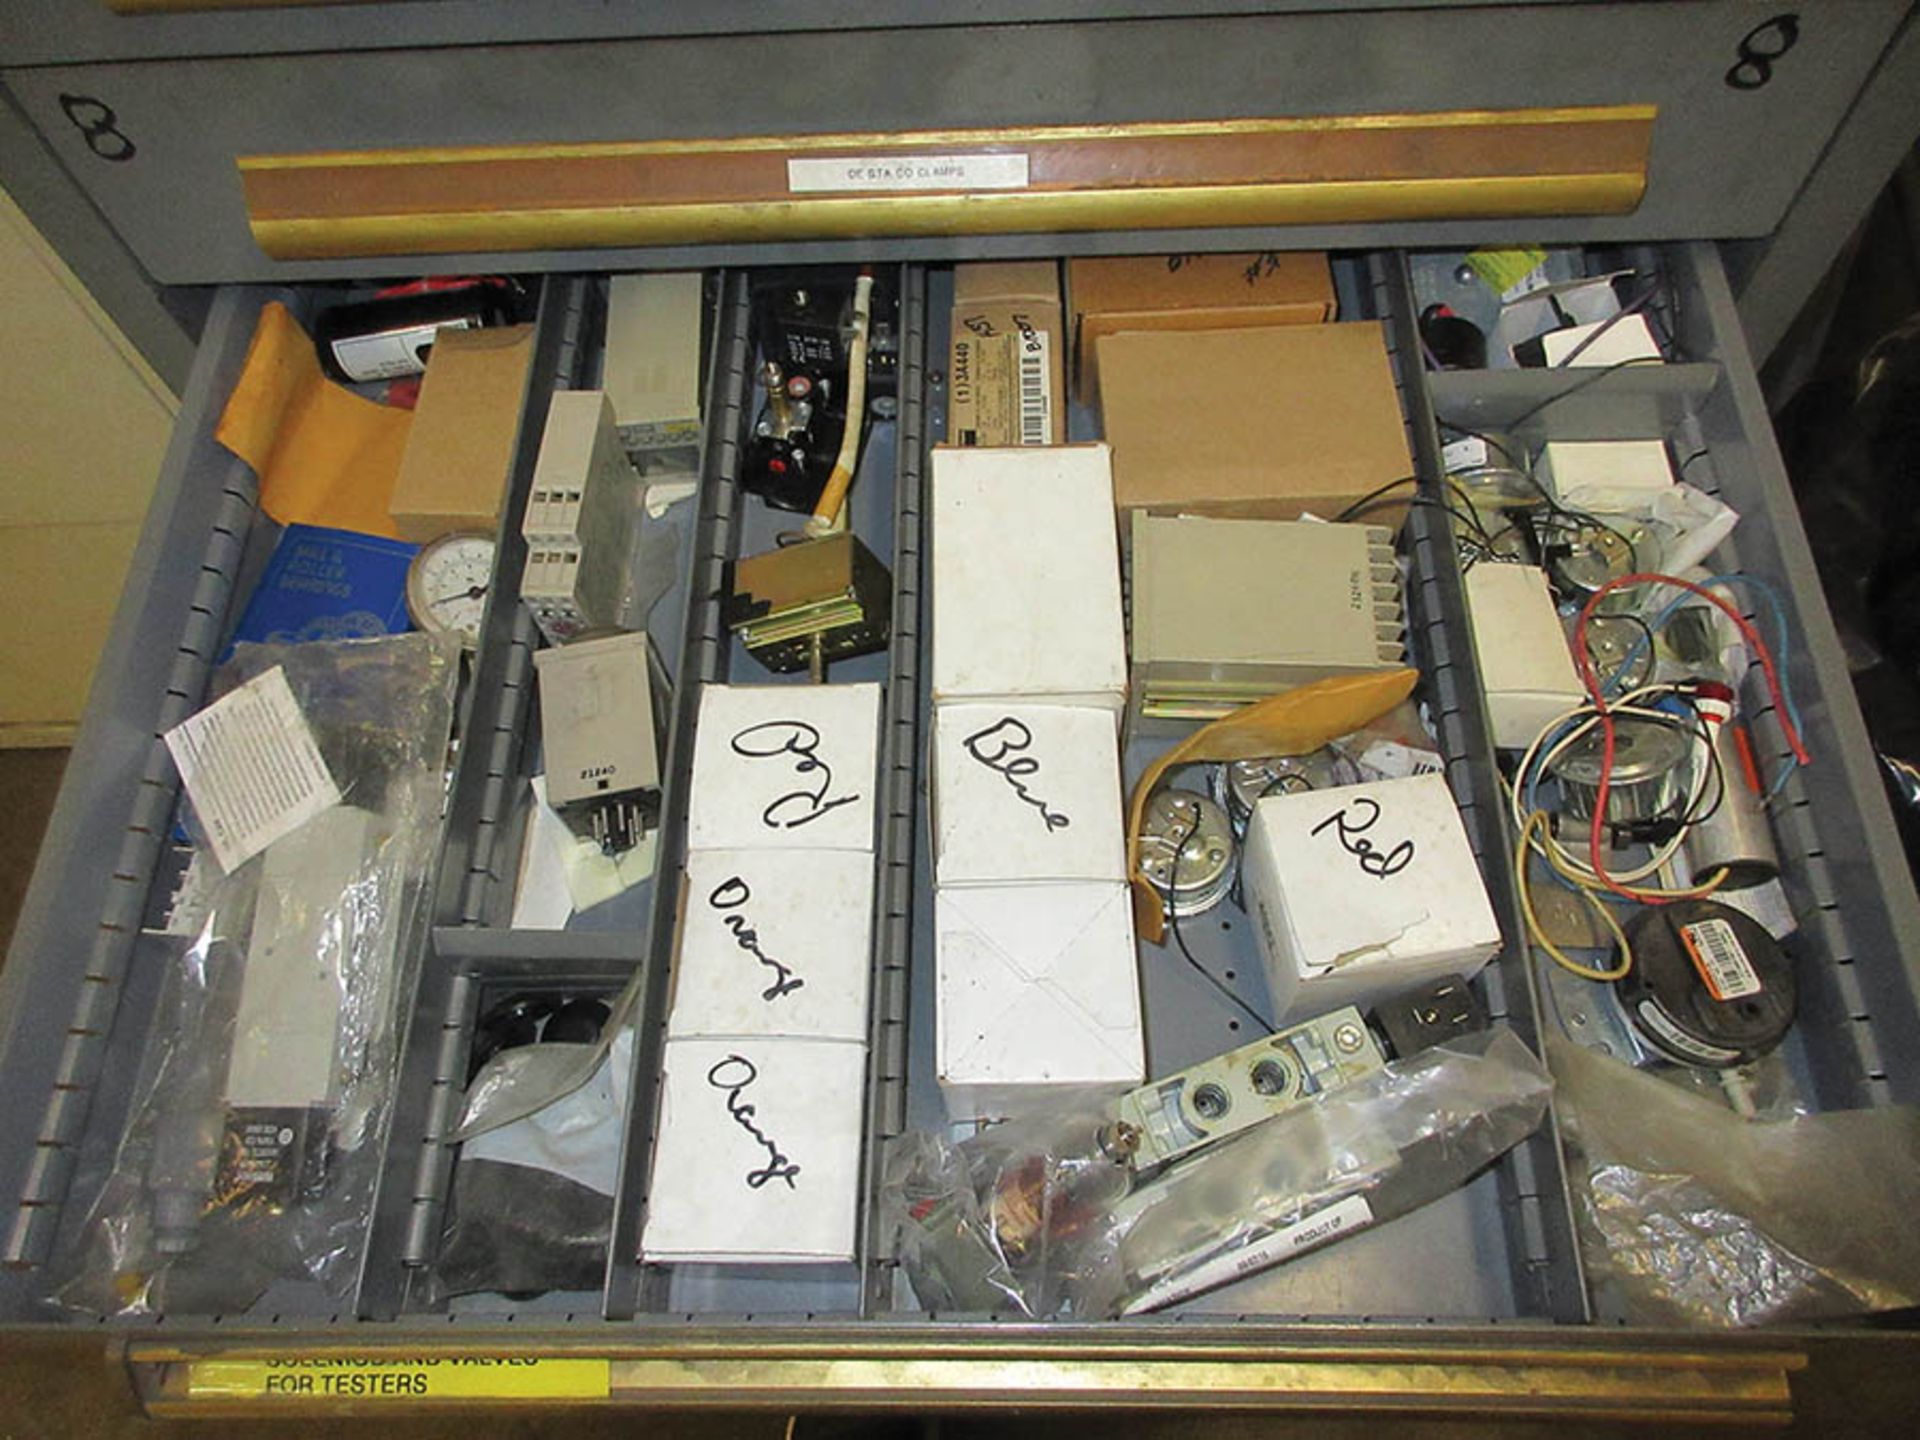 EQUIPTO 13-DRAWER CABINET W/ CONTENTS OF RELAYS, SWITCHES, CONNECTORS, AIR FITTINGS & MORE - Image 5 of 5